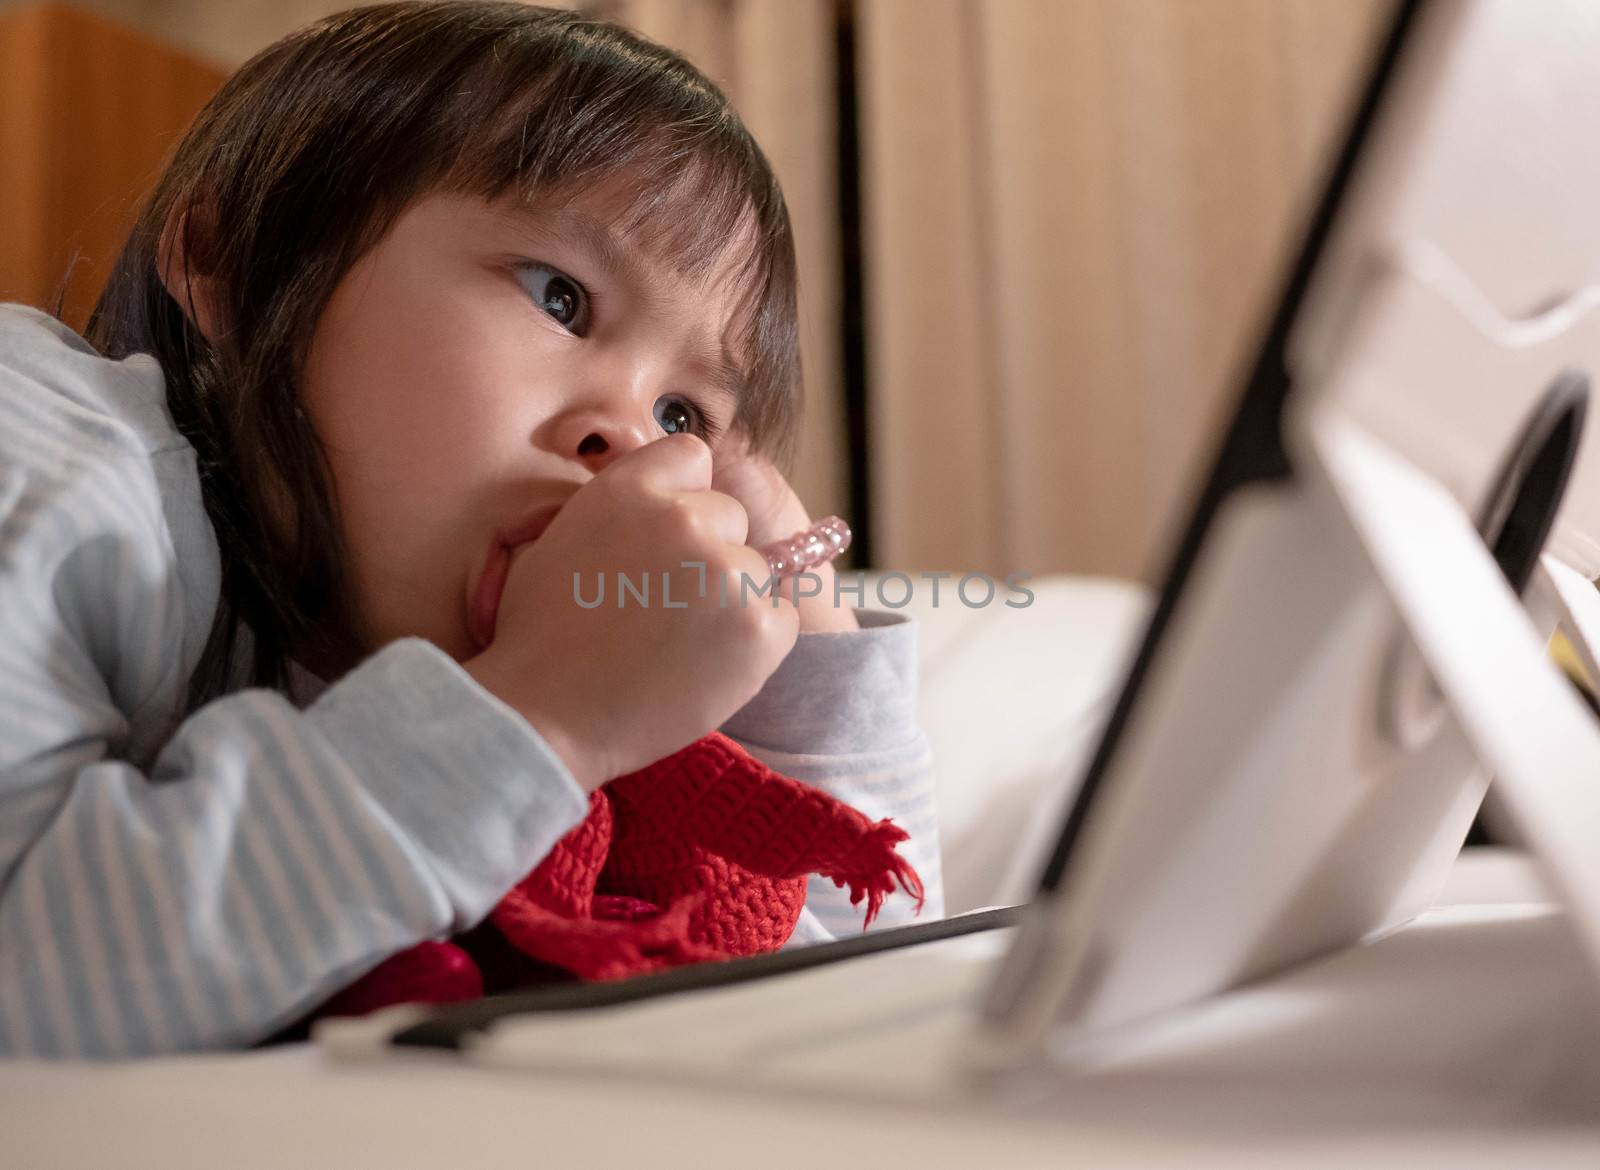 Cute little girl lying on bed with sucking her thumb and looking on a digital tablet in bedroom.